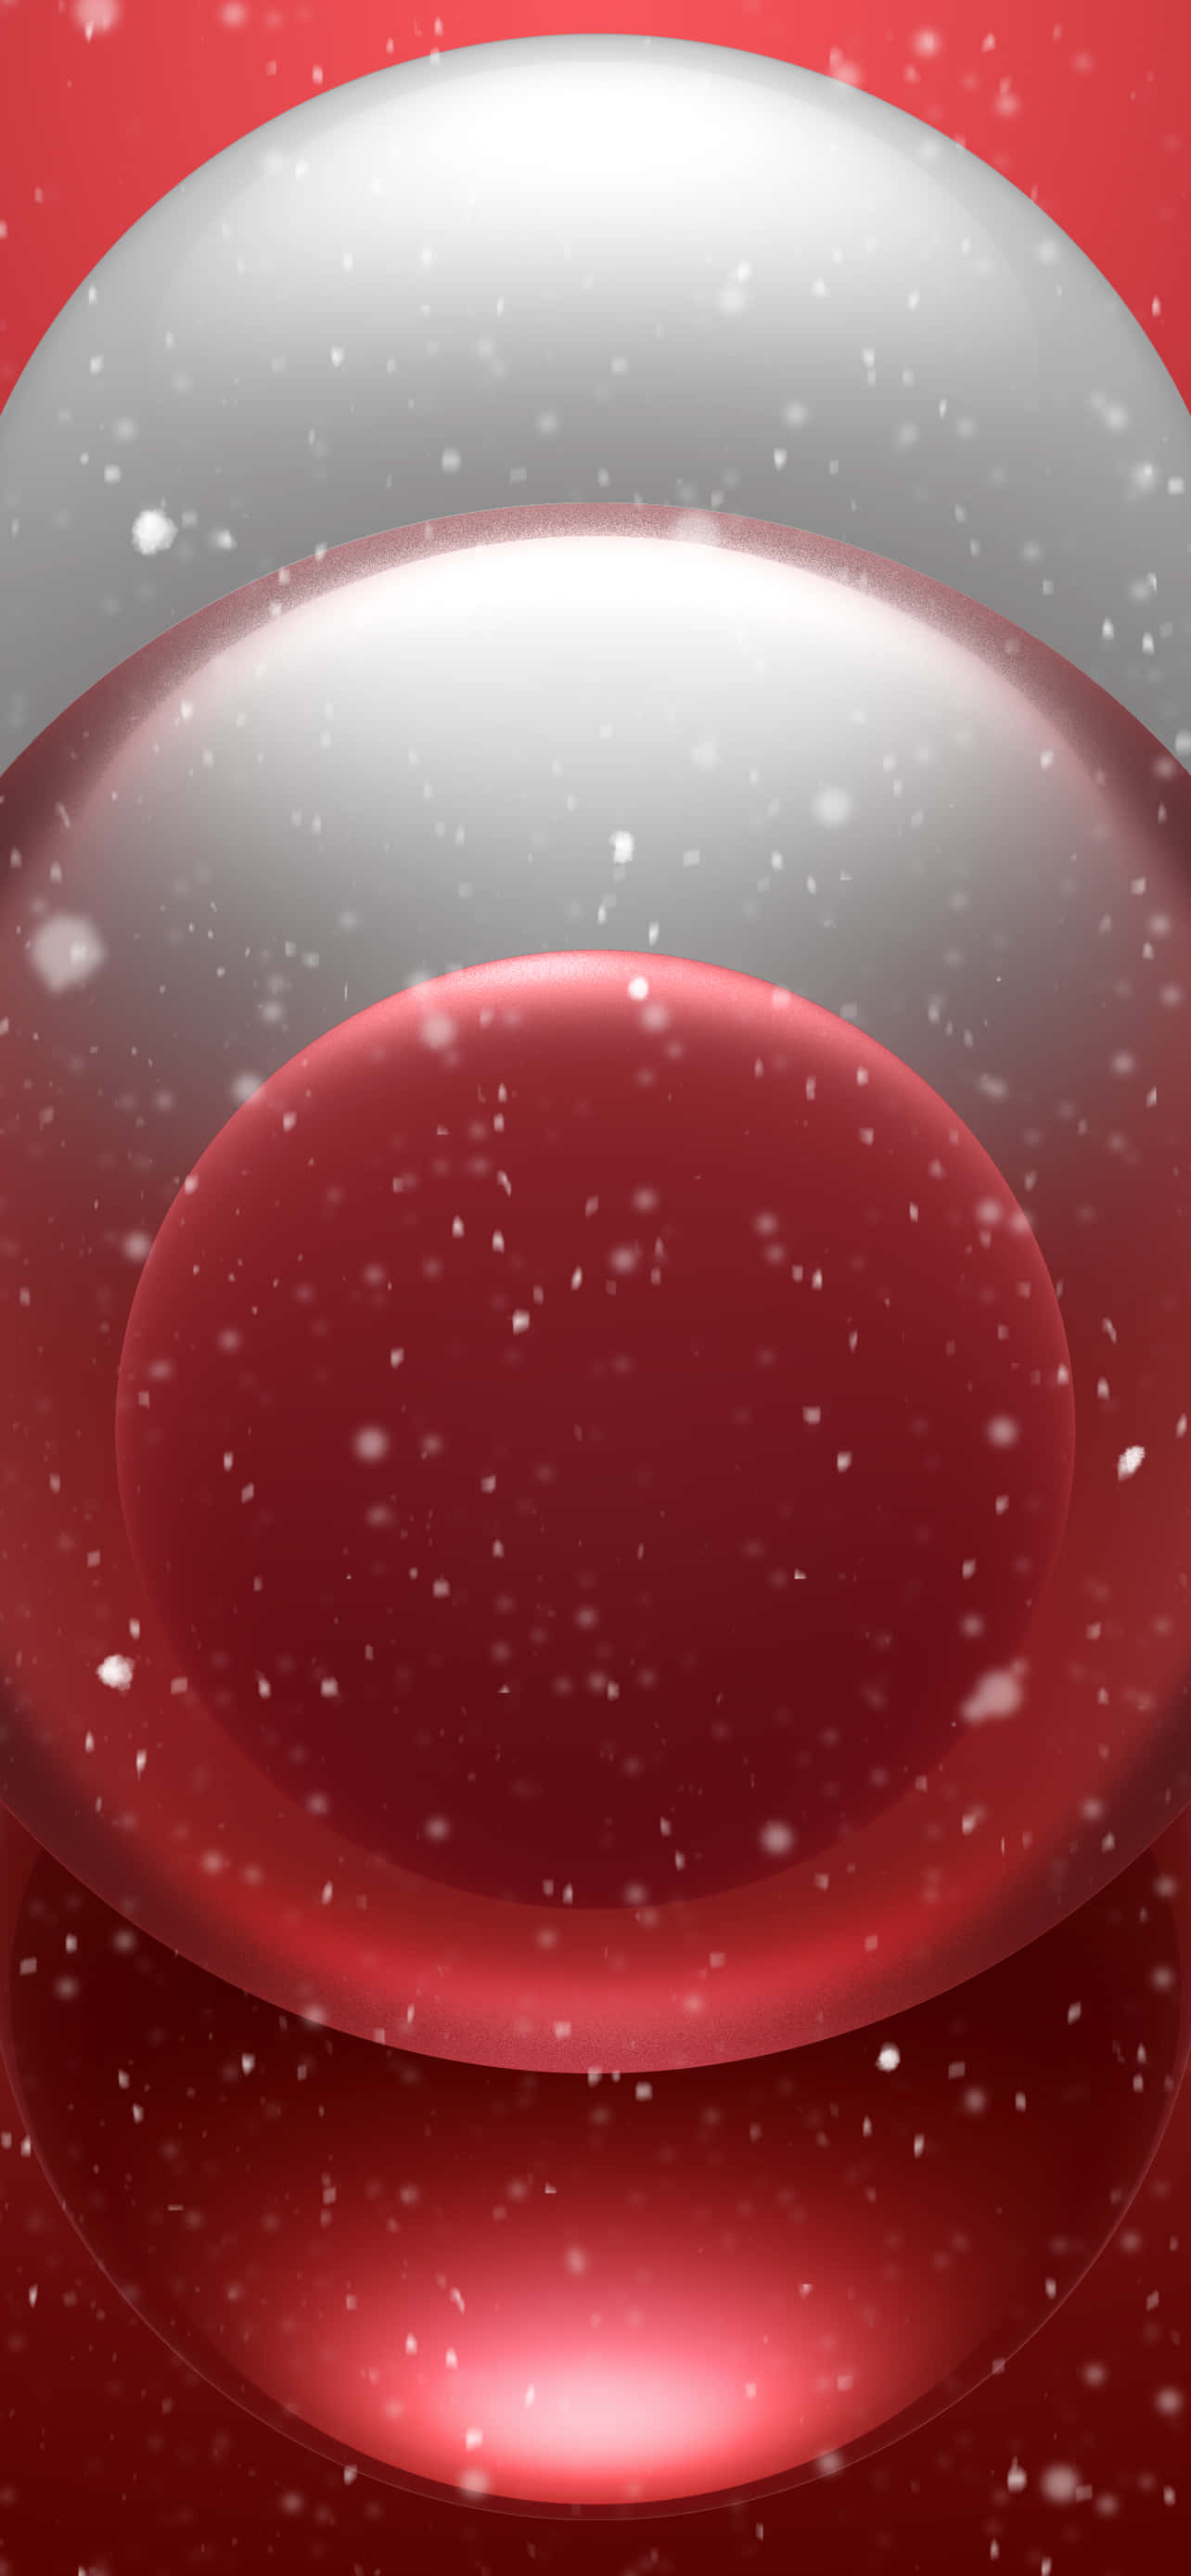 A Red And White Background With Snowflakes